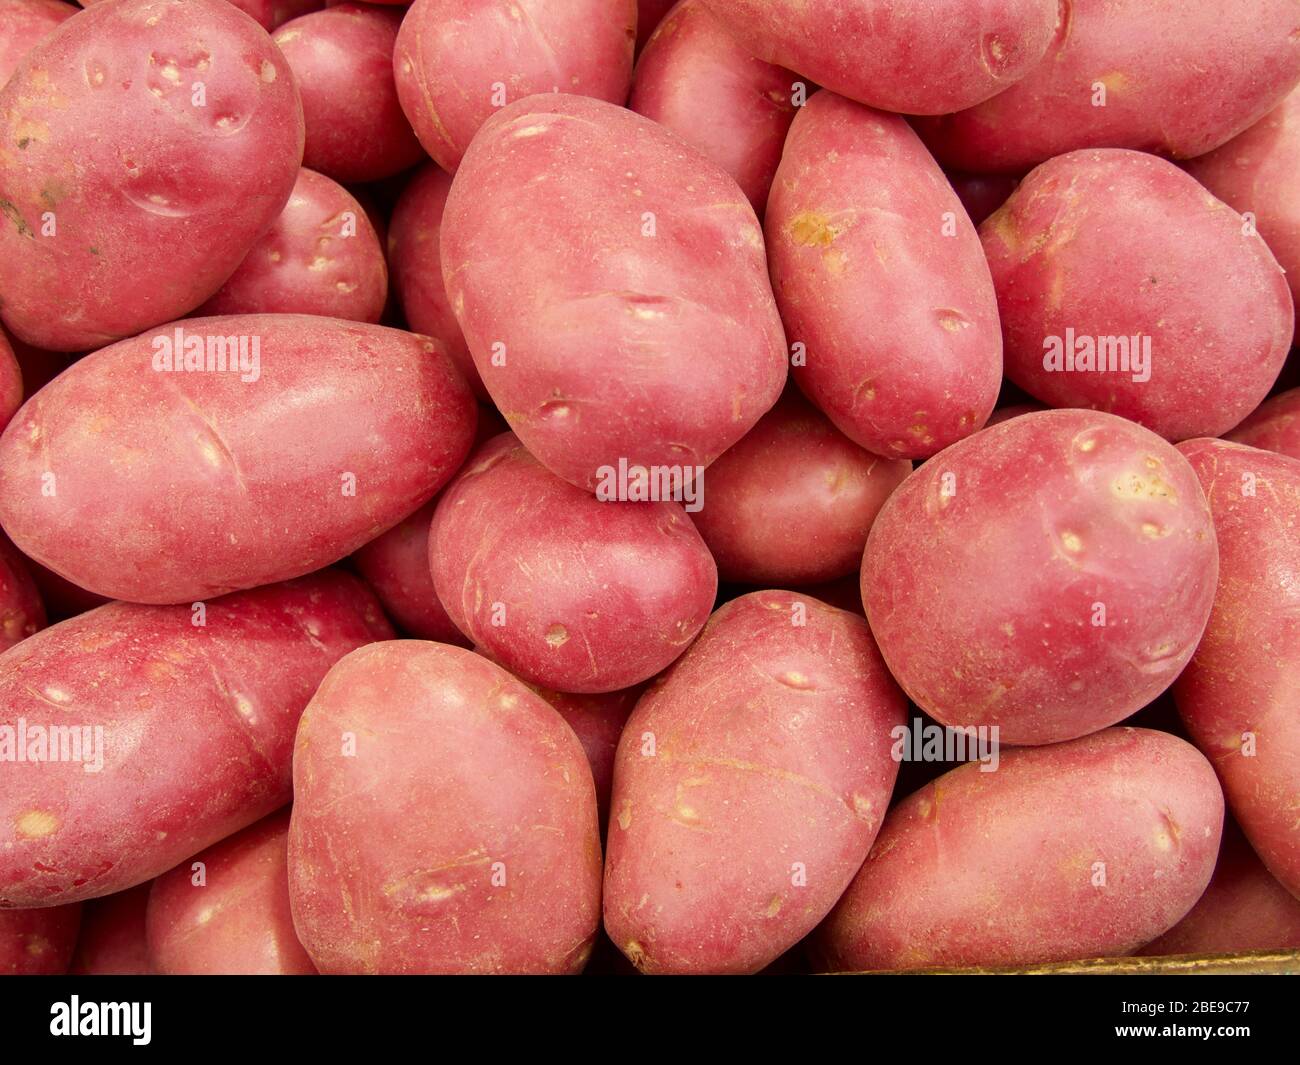 harvested potato tubers different varieties Stock Photo